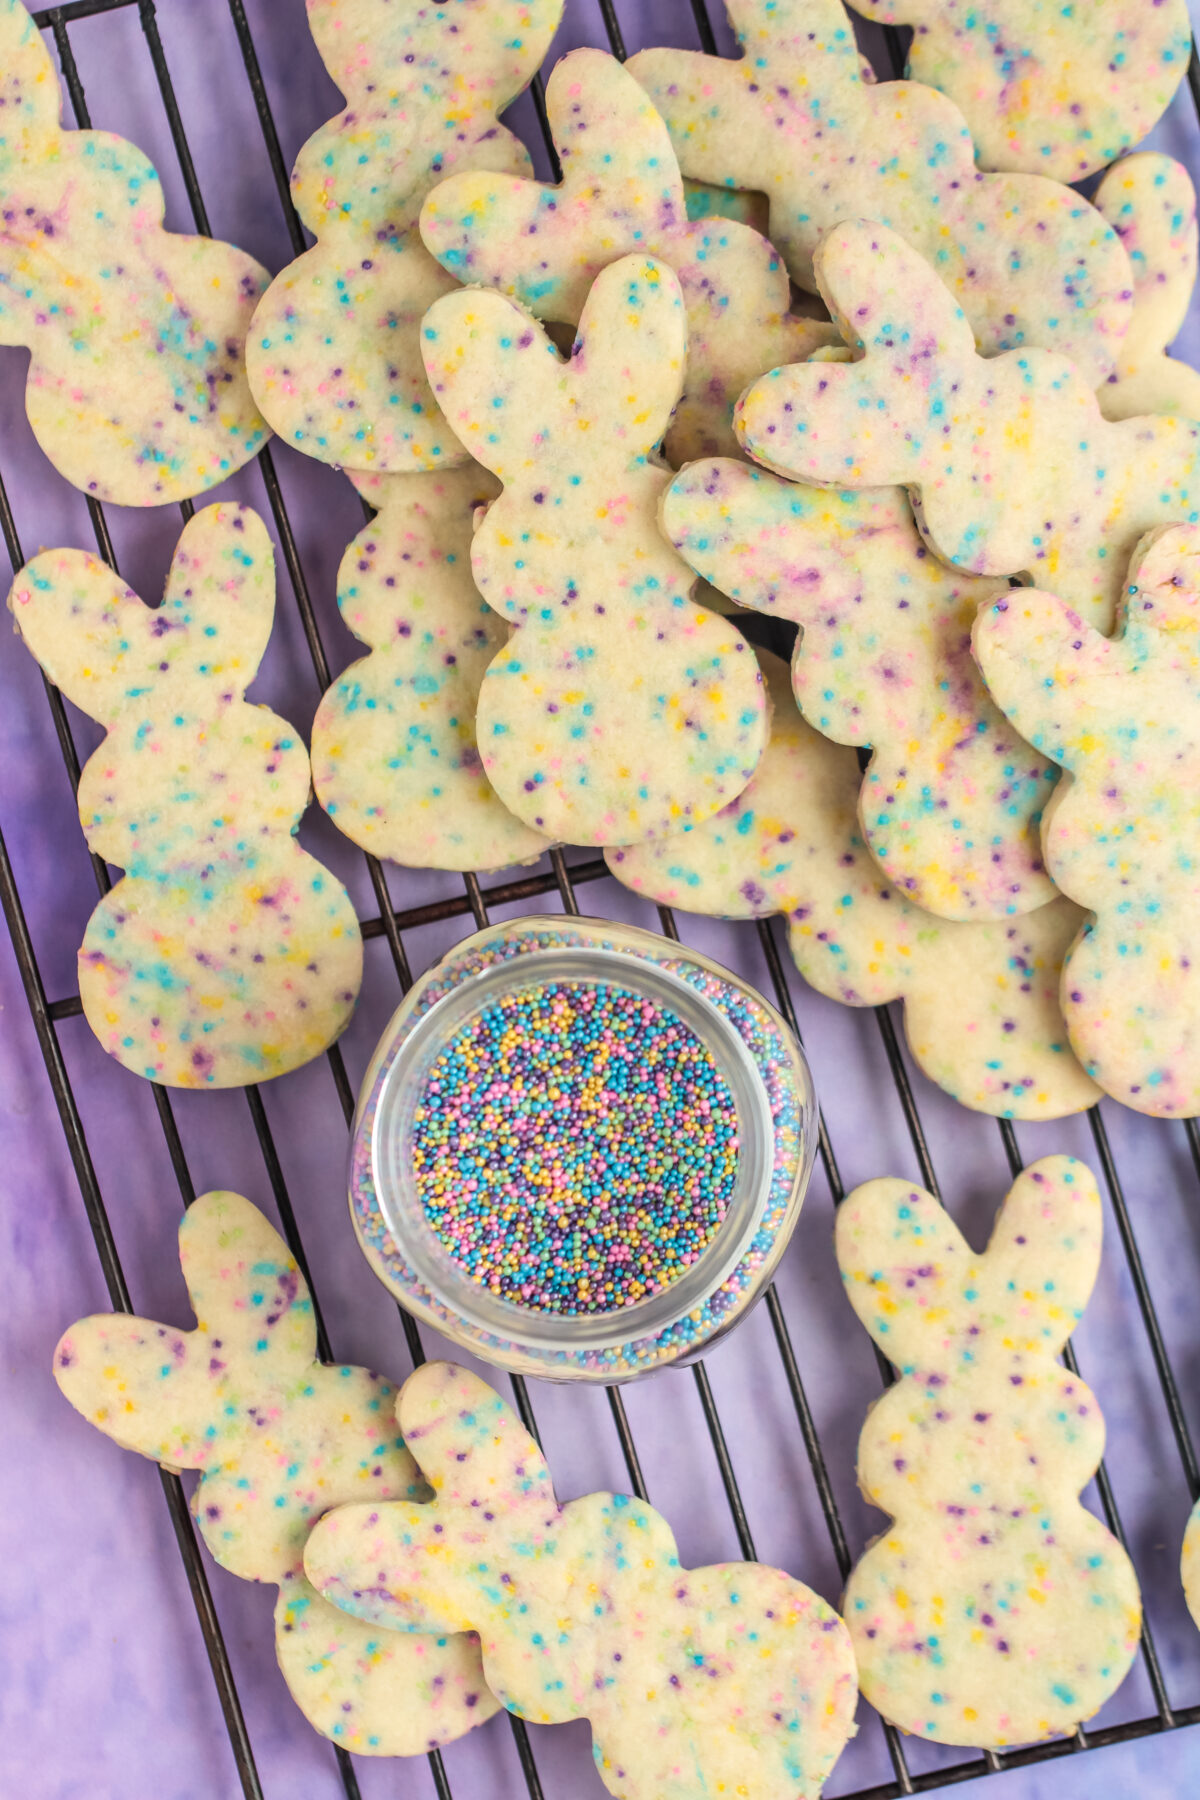 Delicious chocolate dipped Easter bunny sugar cookies complete with sprinkles that are the perfect addition to your Easter dessert table.